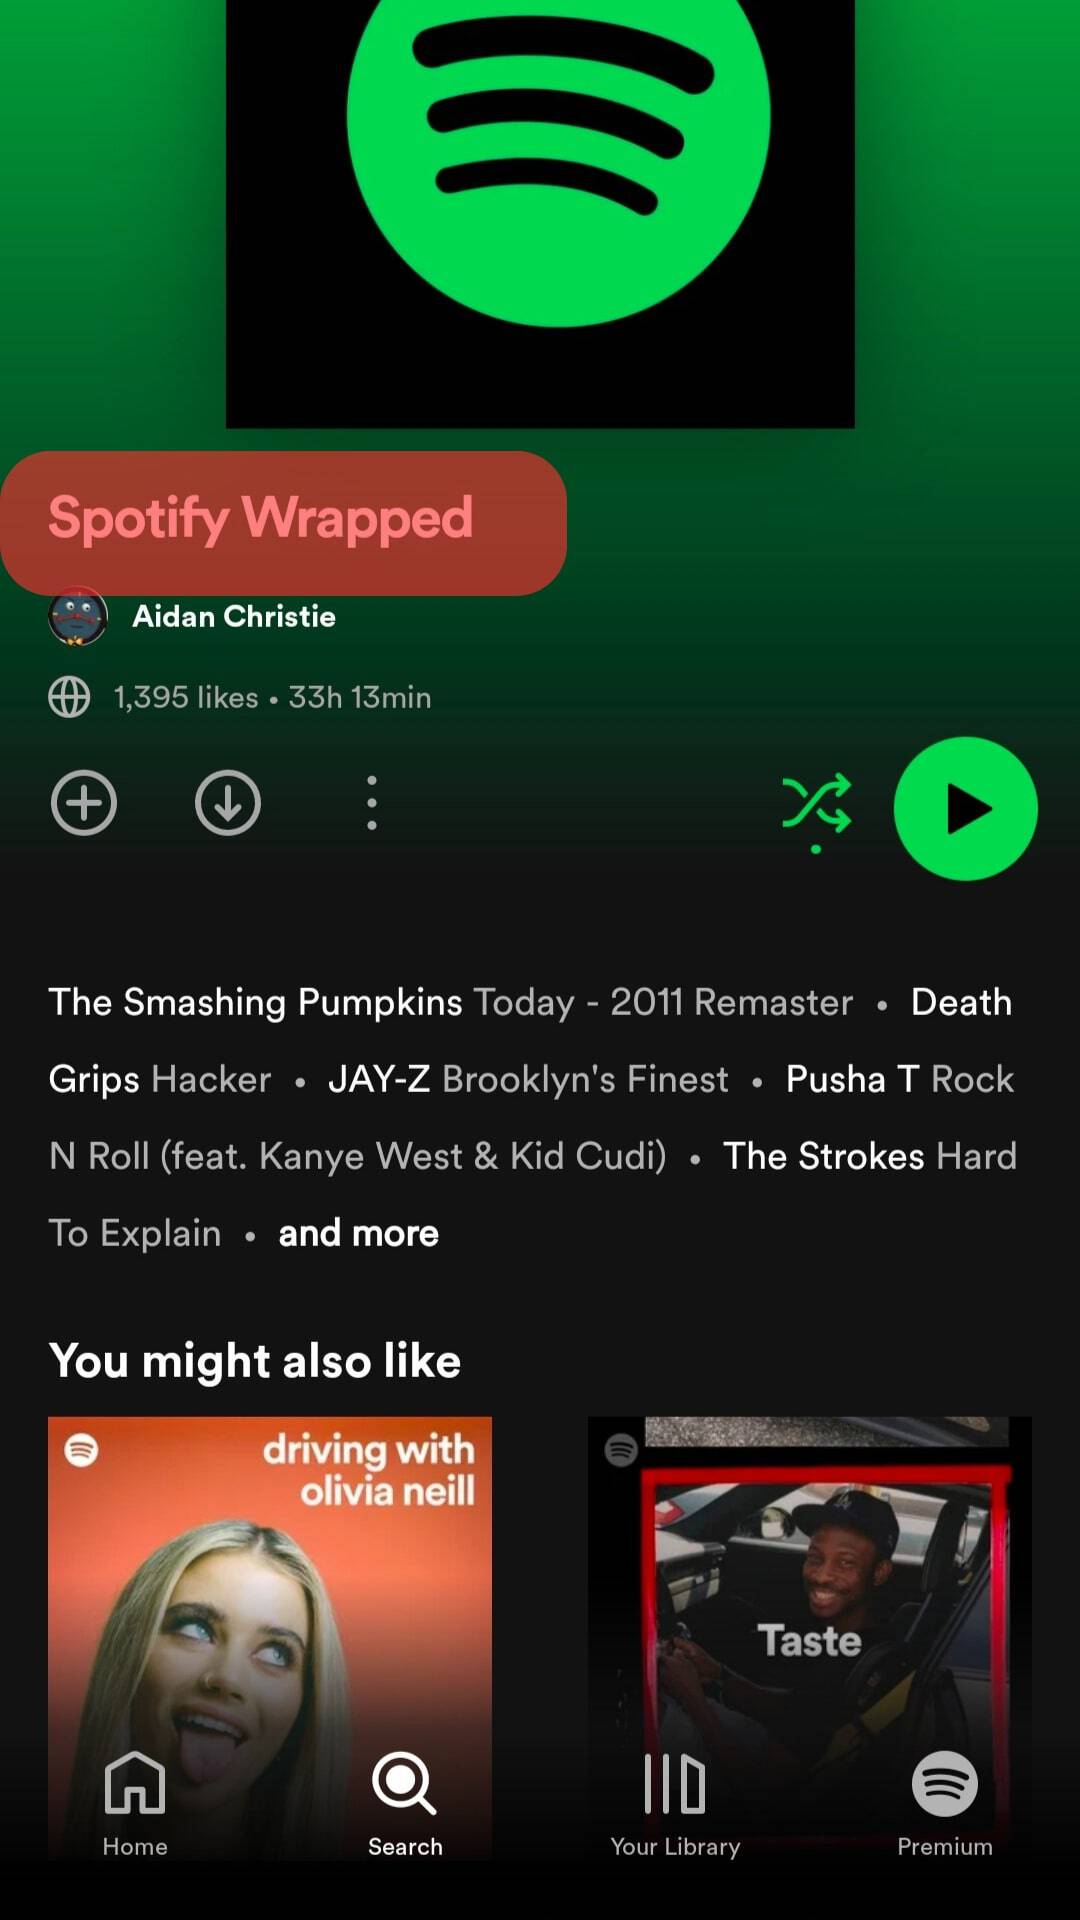 Go To Your Spotify Account And Find Your Spotify Wrapped.